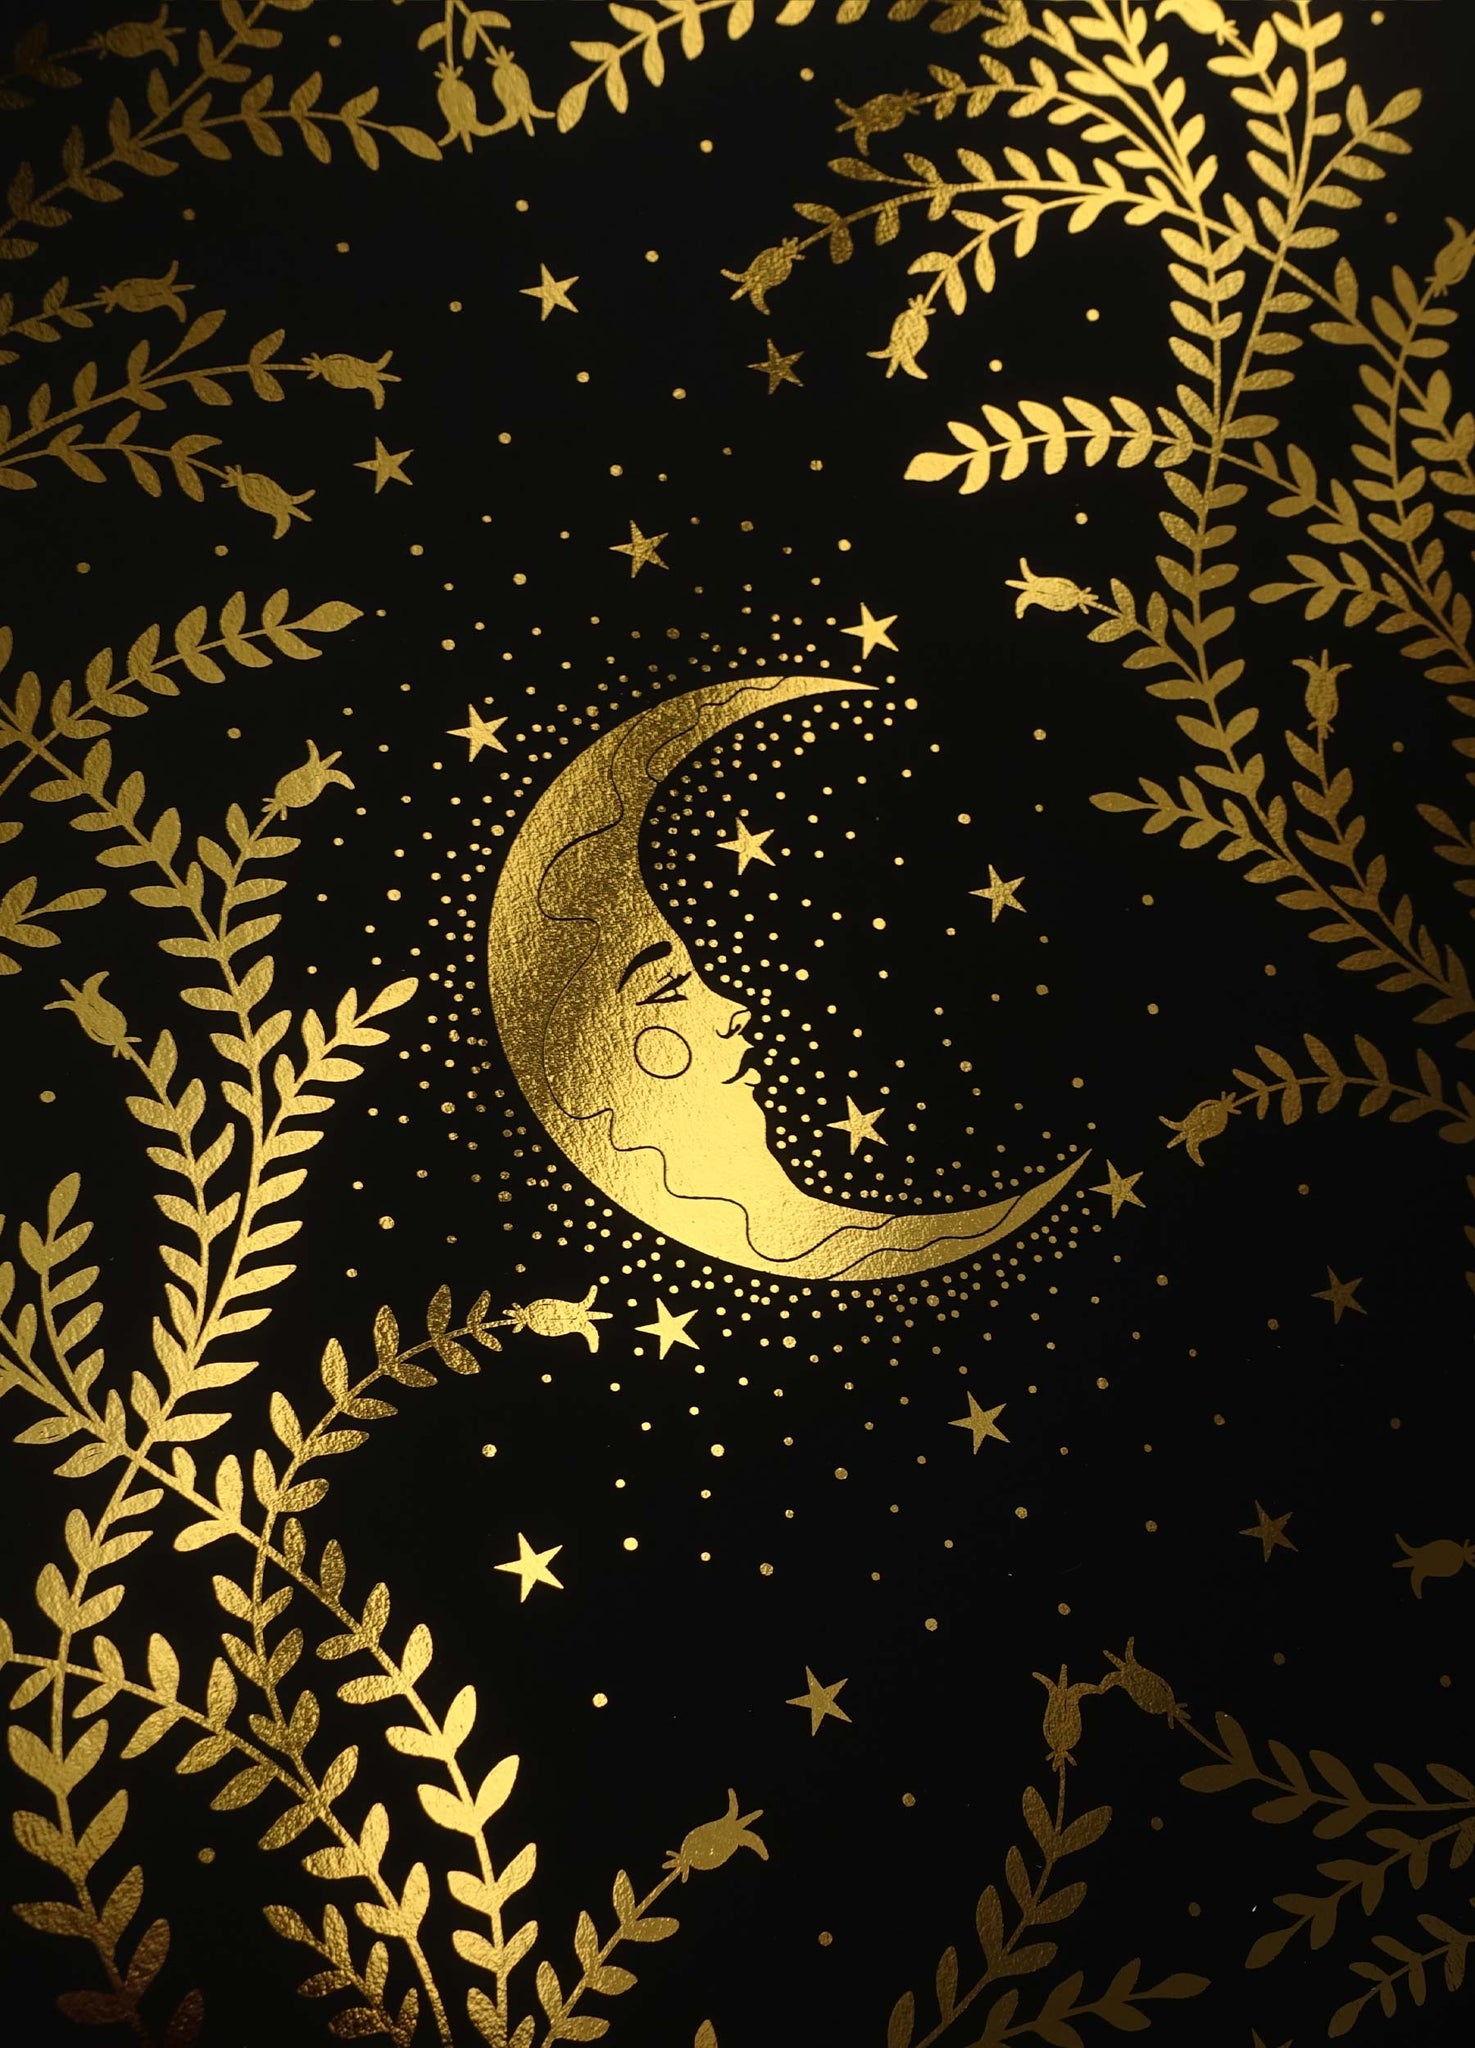 Moon Night botanical forest gold foil art print on black paper by Cocorrina & Co